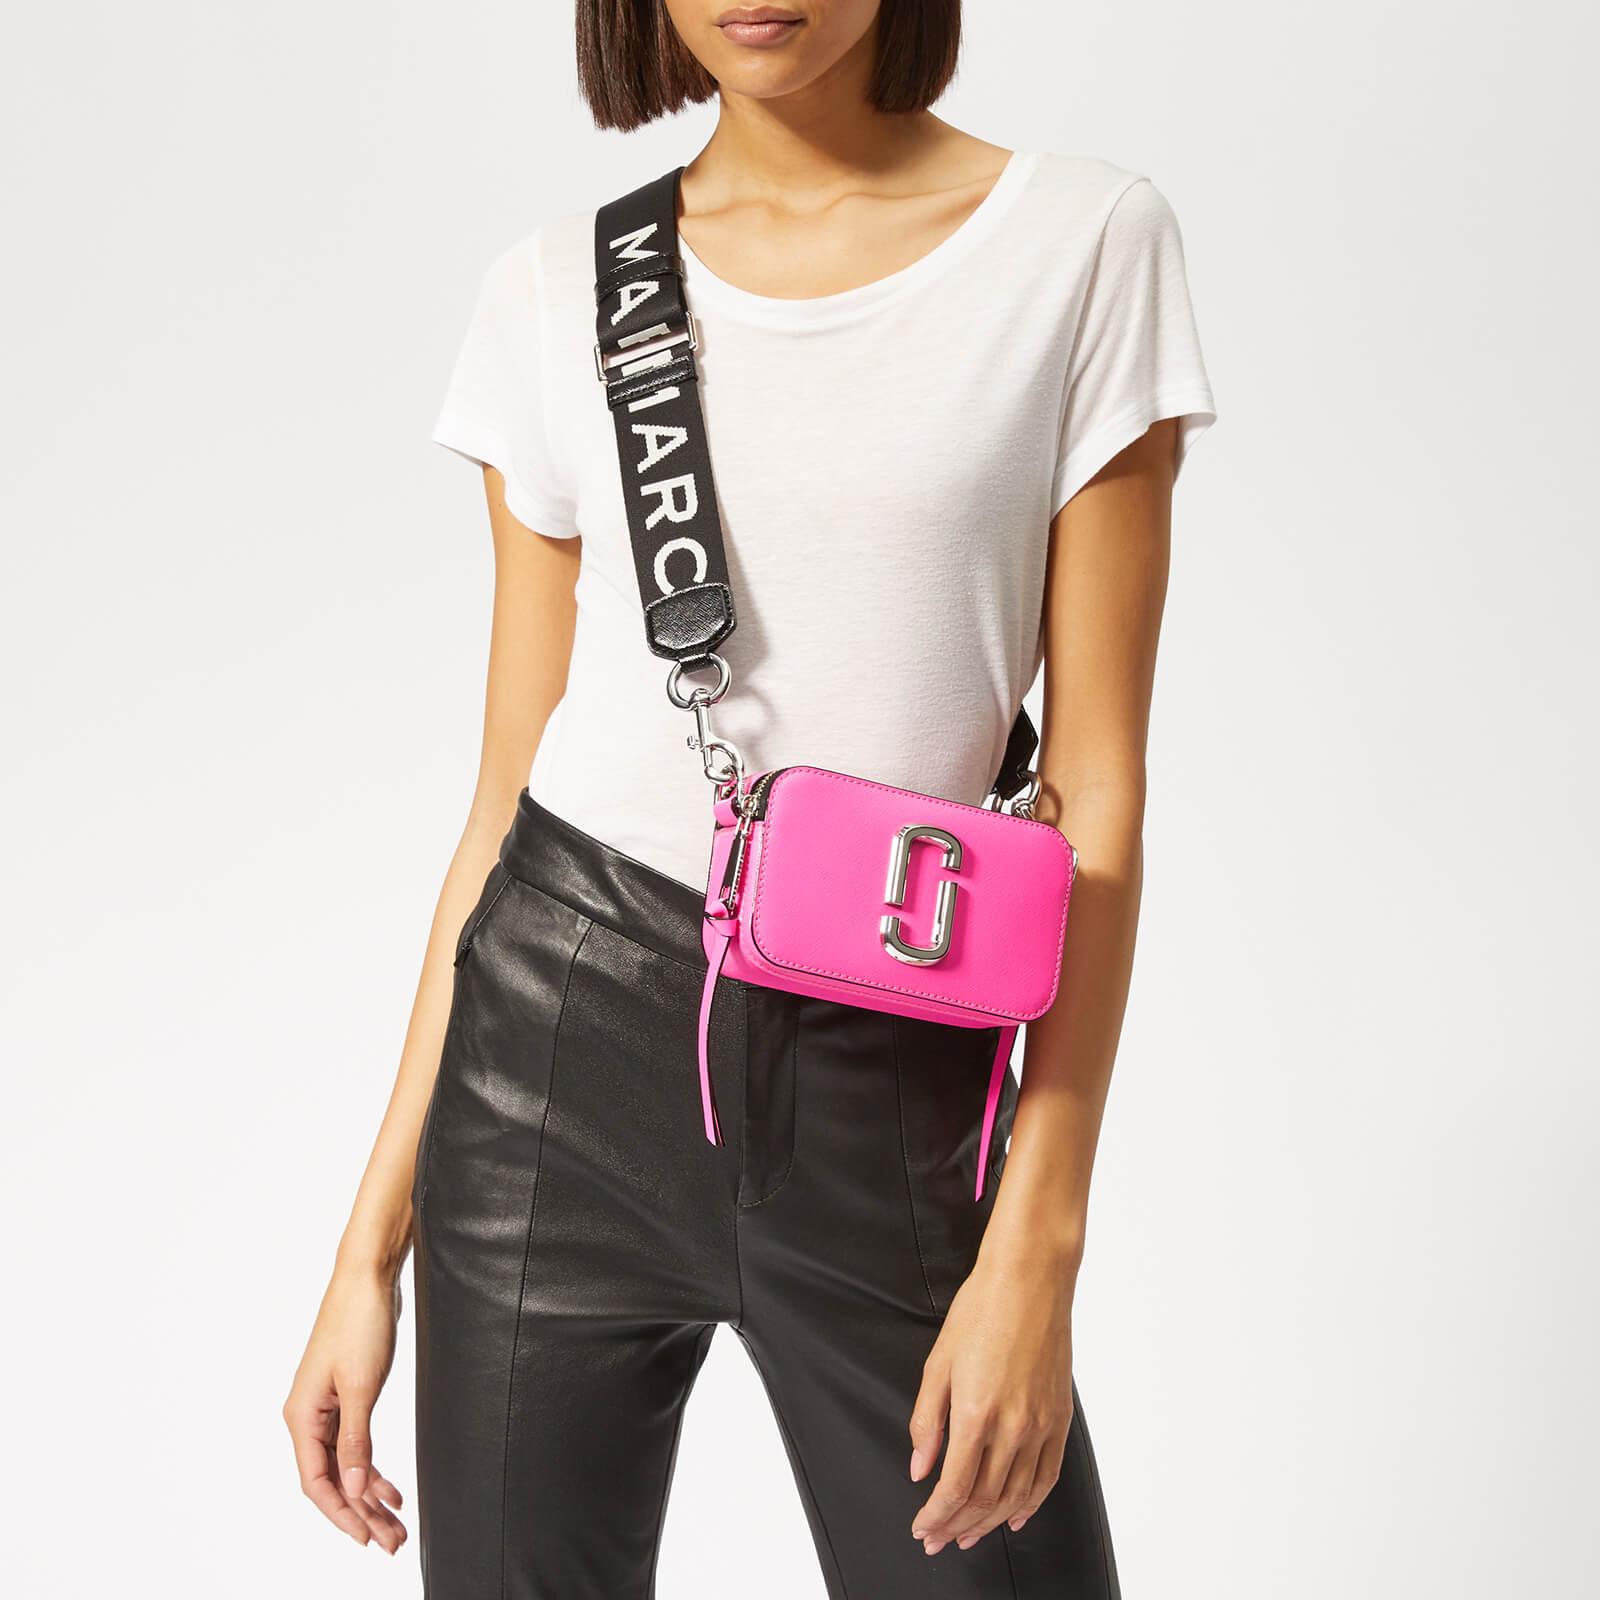 Marc Jacobs Snapshot Fluoro Bag In Bright Pink Leather With Polyurethane  Coating | Lyst